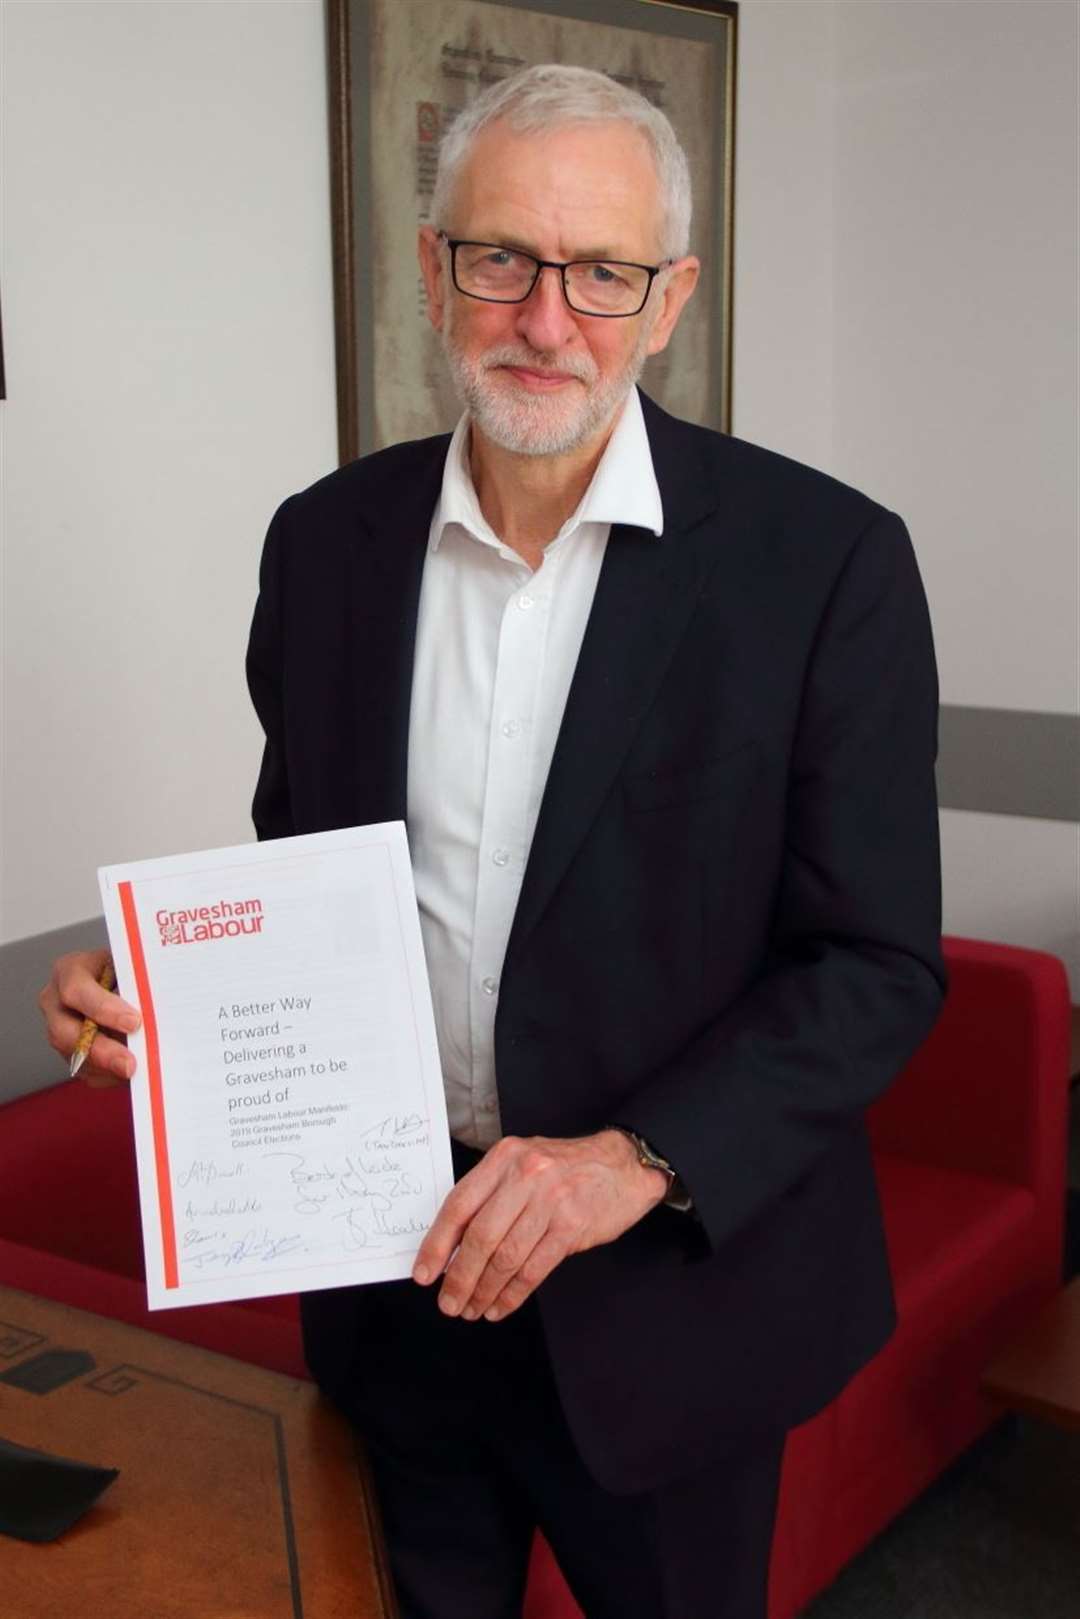 Jeremy Corbyn with a copy of the Gravesham Labour group's manifesto, which he signed